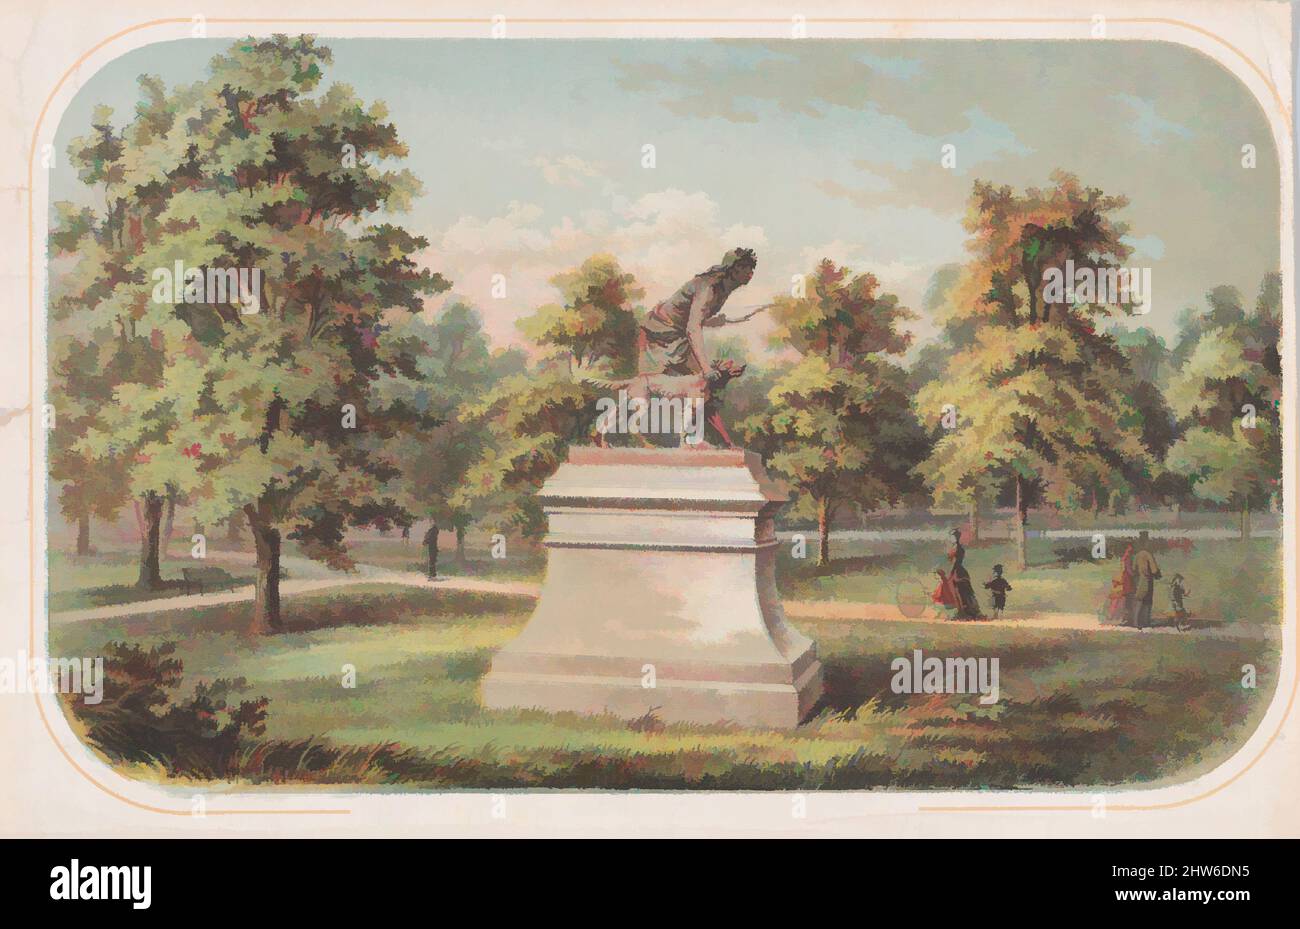 Art inspired by Central Park, Statue of the Indian Hunter, 1869, Hand-colored lithograph, image: 4 13/16 x 8 in. (12.3 x 20.3 cm), Prints, Anonymous, American, 19th century, Sculpted by John Quincy Adams Ward (American, Urbana, Ohio 1830–1910 New York), In 1869, a committee of public, Classic works modernized by Artotop with a splash of modernity. Shapes, color and value, eye-catching visual impact on art. Emotions through freedom of artworks in a contemporary way. A timeless message pursuing a wildly creative new direction. Artists turning to the digital medium and creating the Artotop NFT Stock Photo